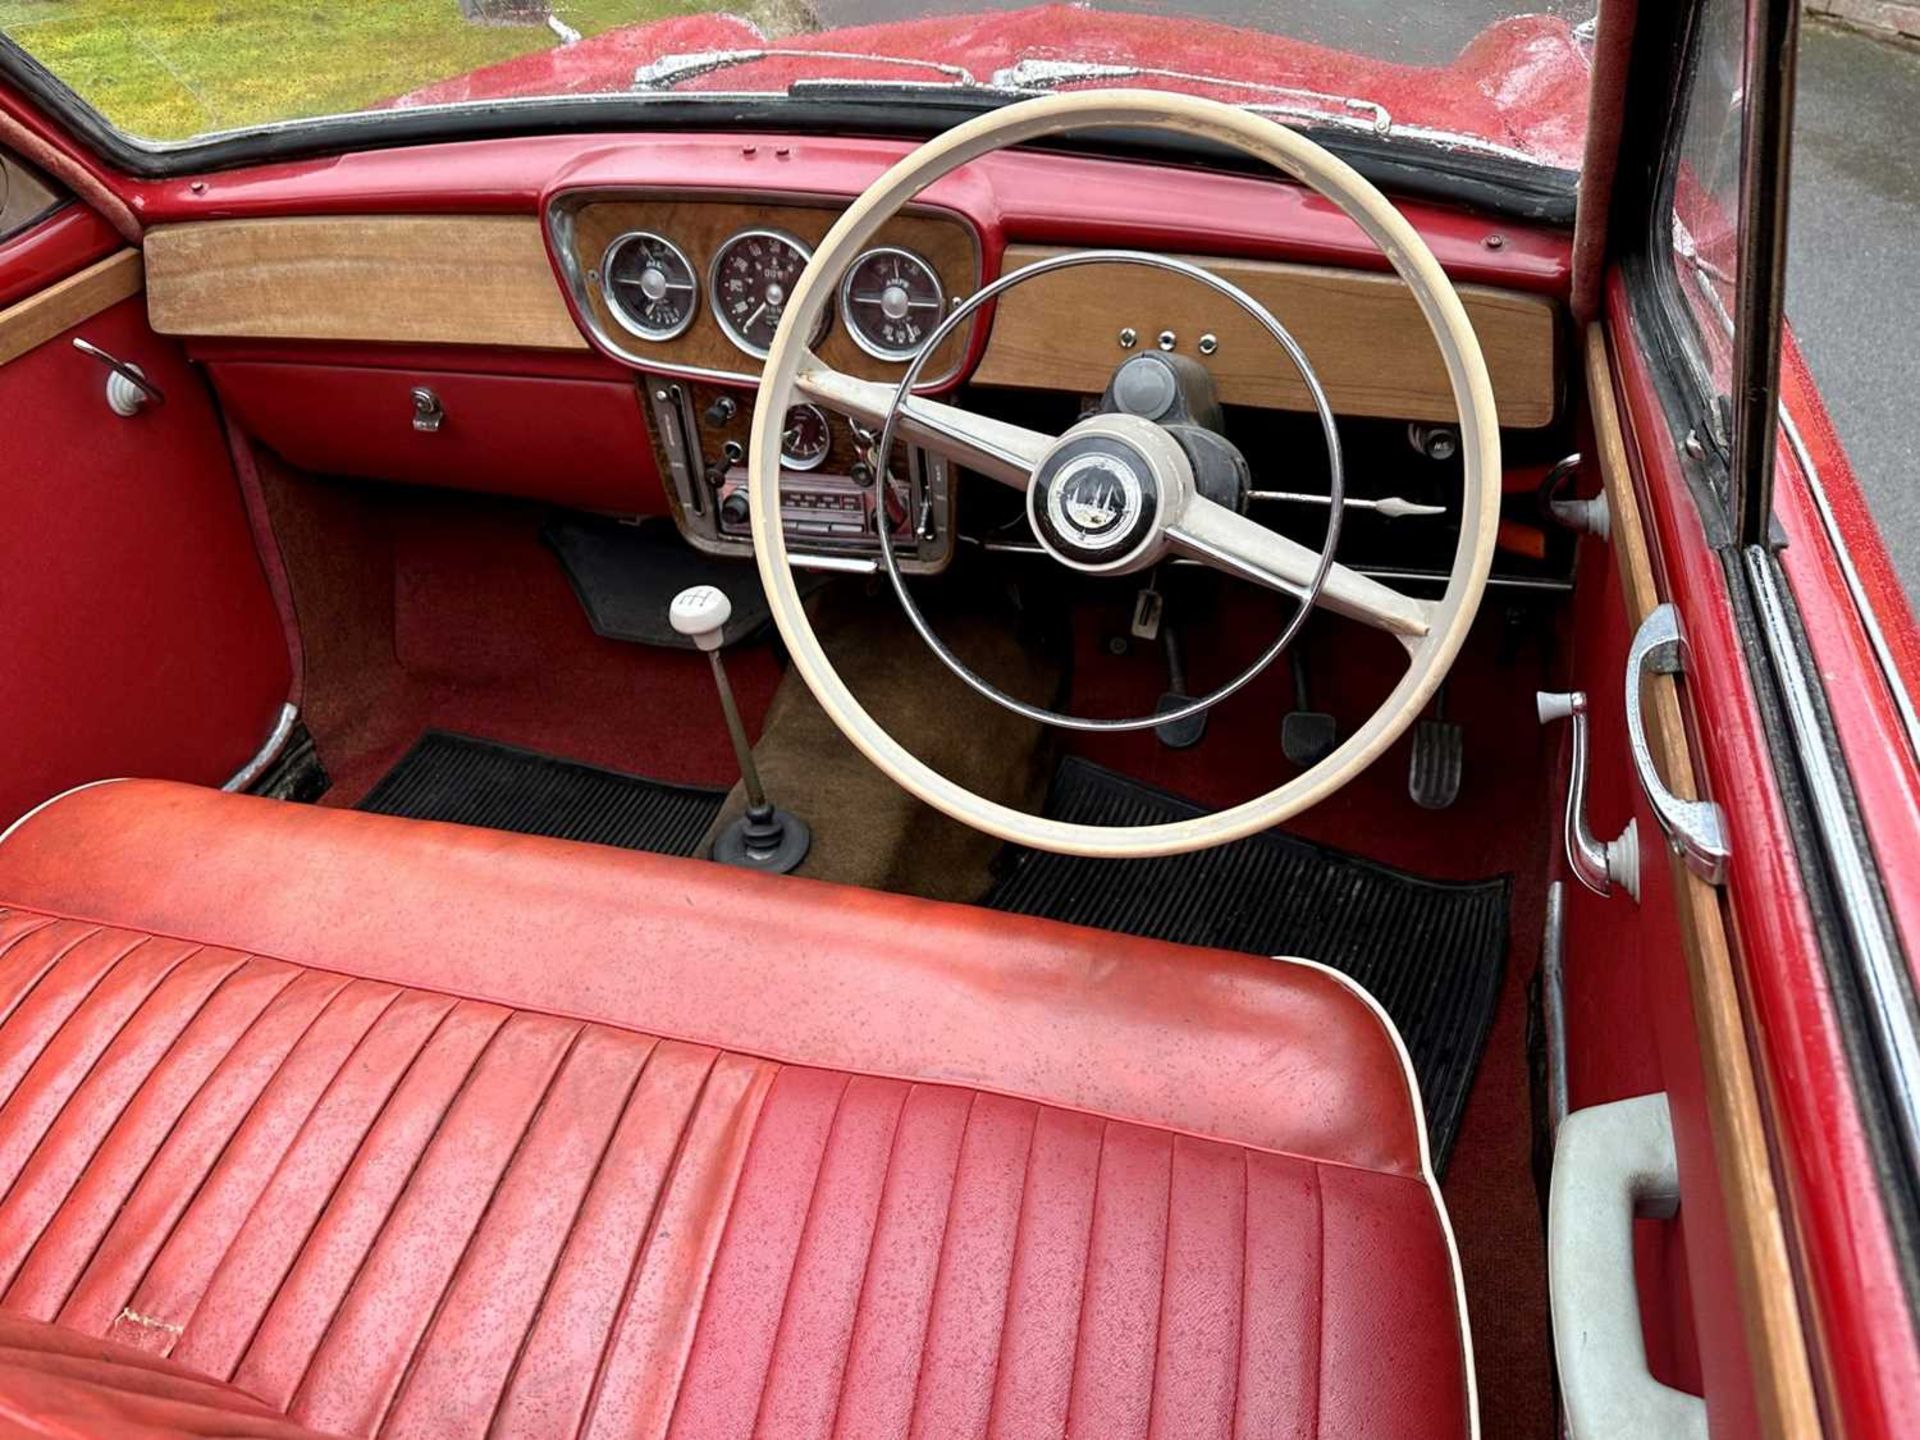 1961 Singer Gazelle Convertible Comes complete with overdrive, period radio and badge bar - Image 60 of 95